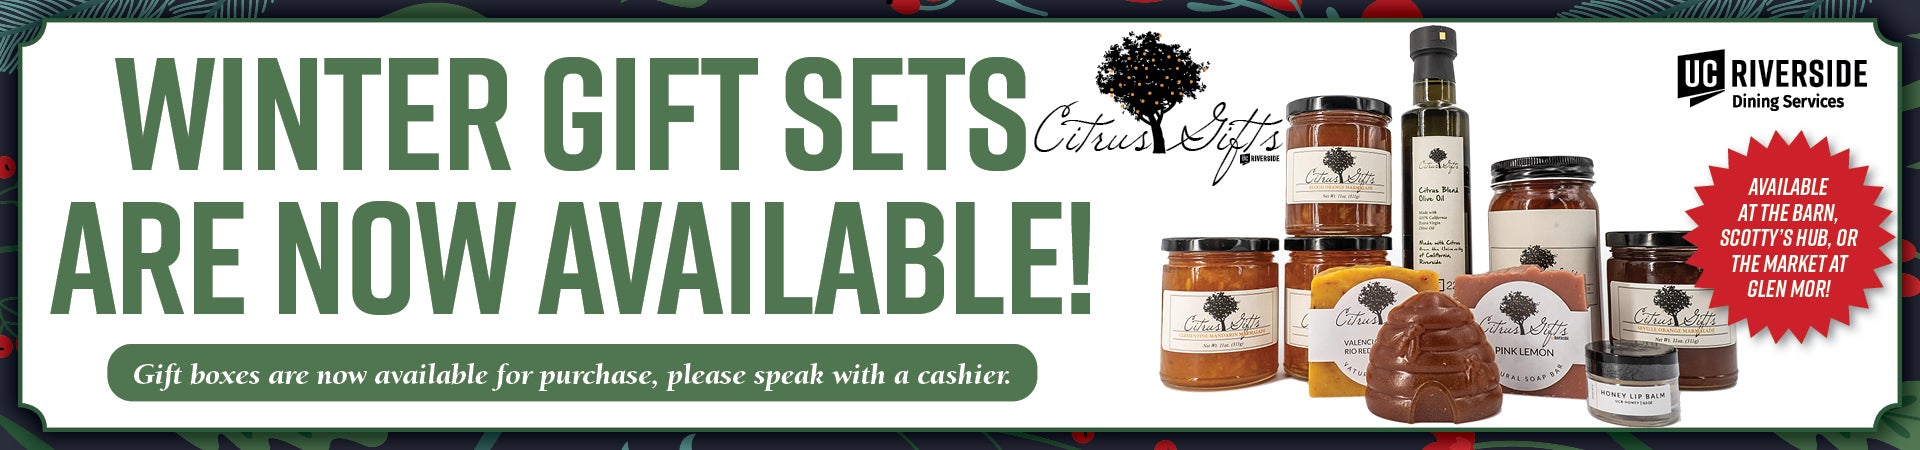 Winter Gift Sets Are Now Available